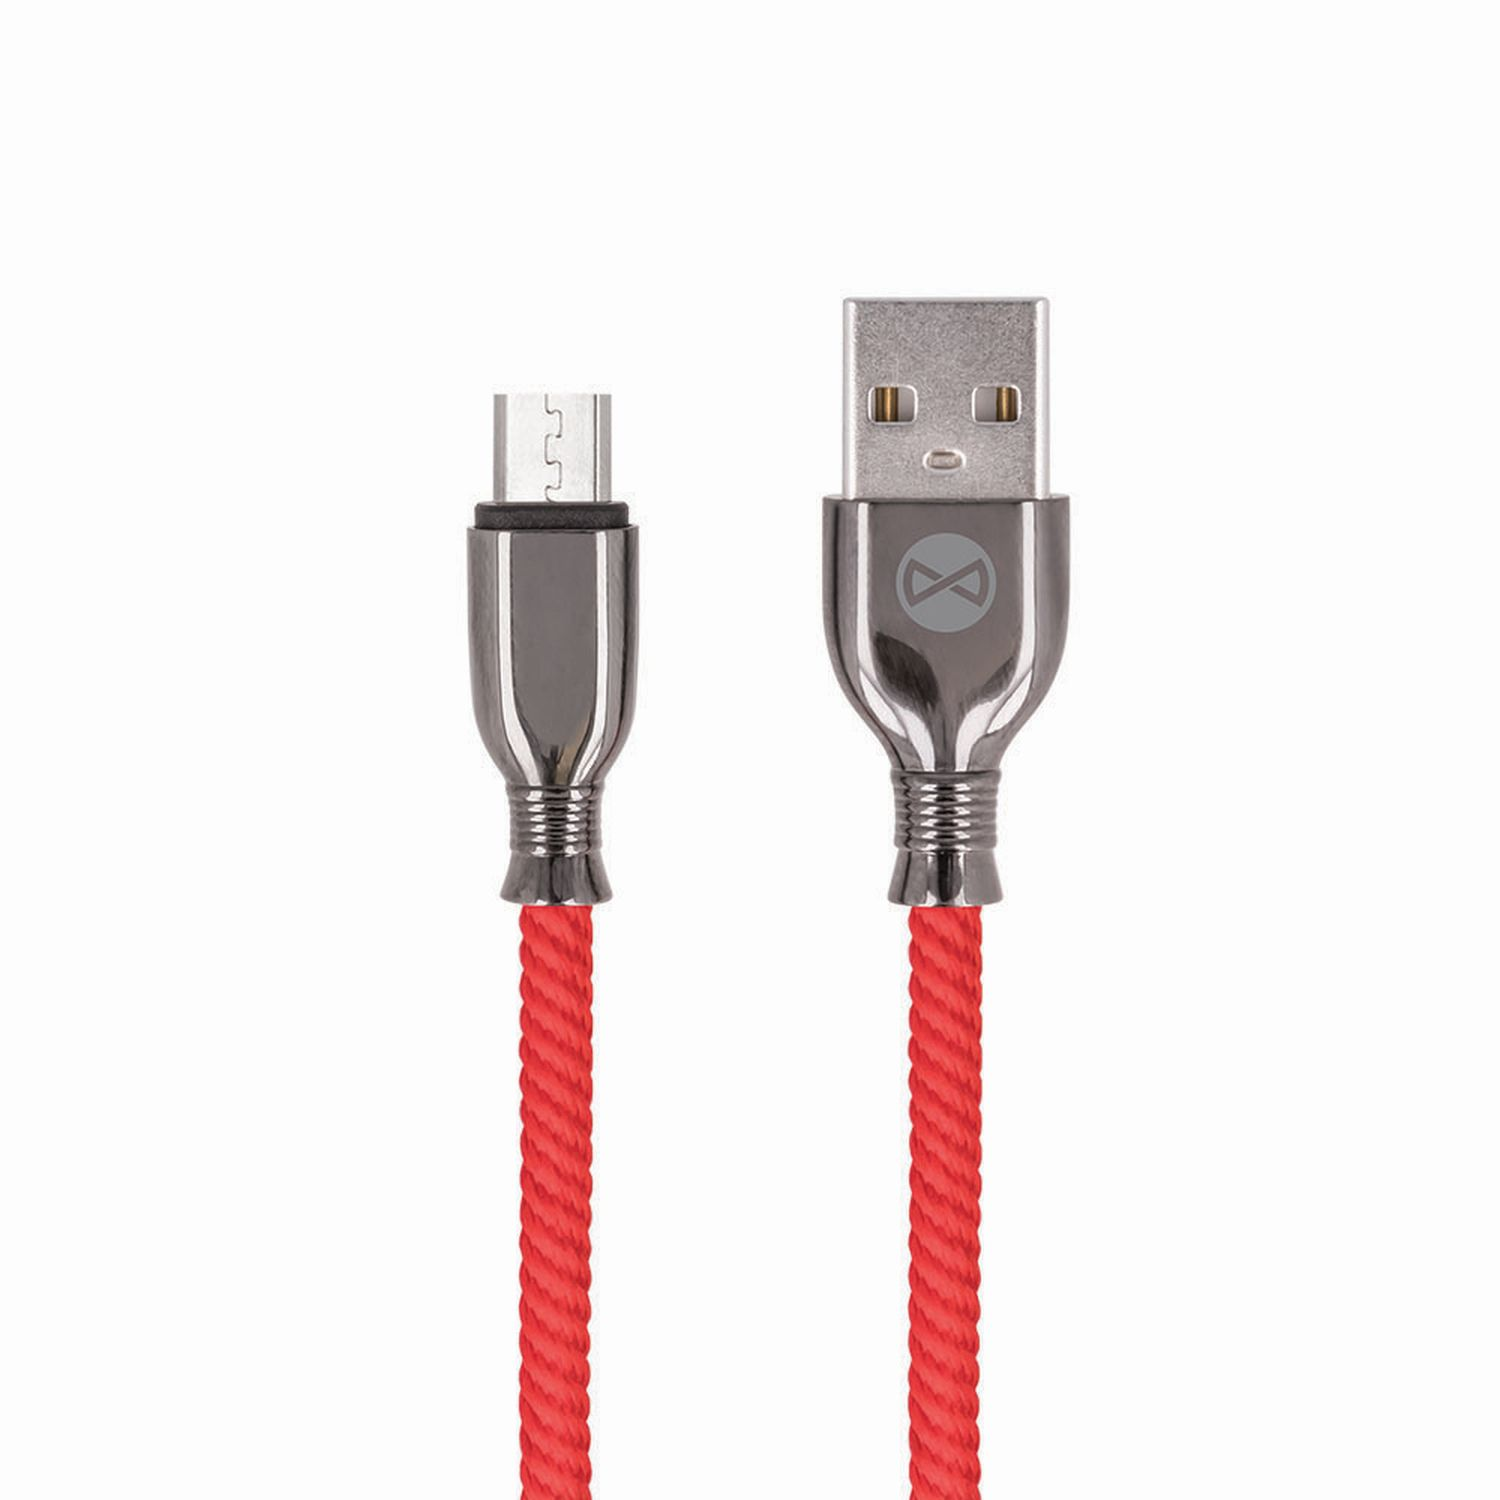 FOREVER Tornado 3A Micro Ladekabel, USB Rot Bruch, Anti